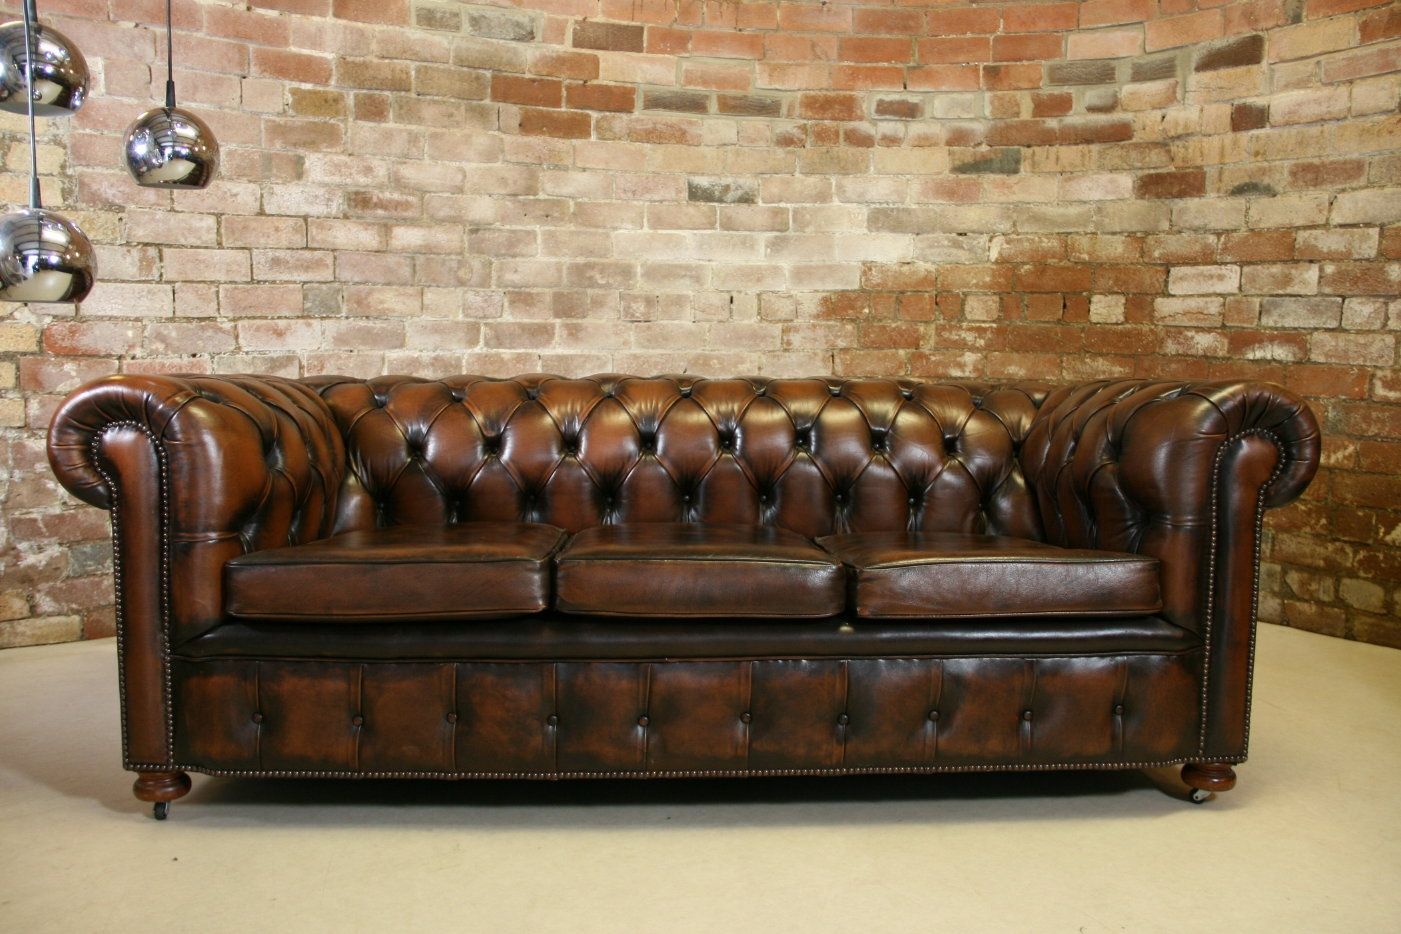 Vintage Chesterfield Antique Brown Leather 3 Seater Sofa Retro With Regard To Vintage Chesterfield Sofas (View 1 of 15)